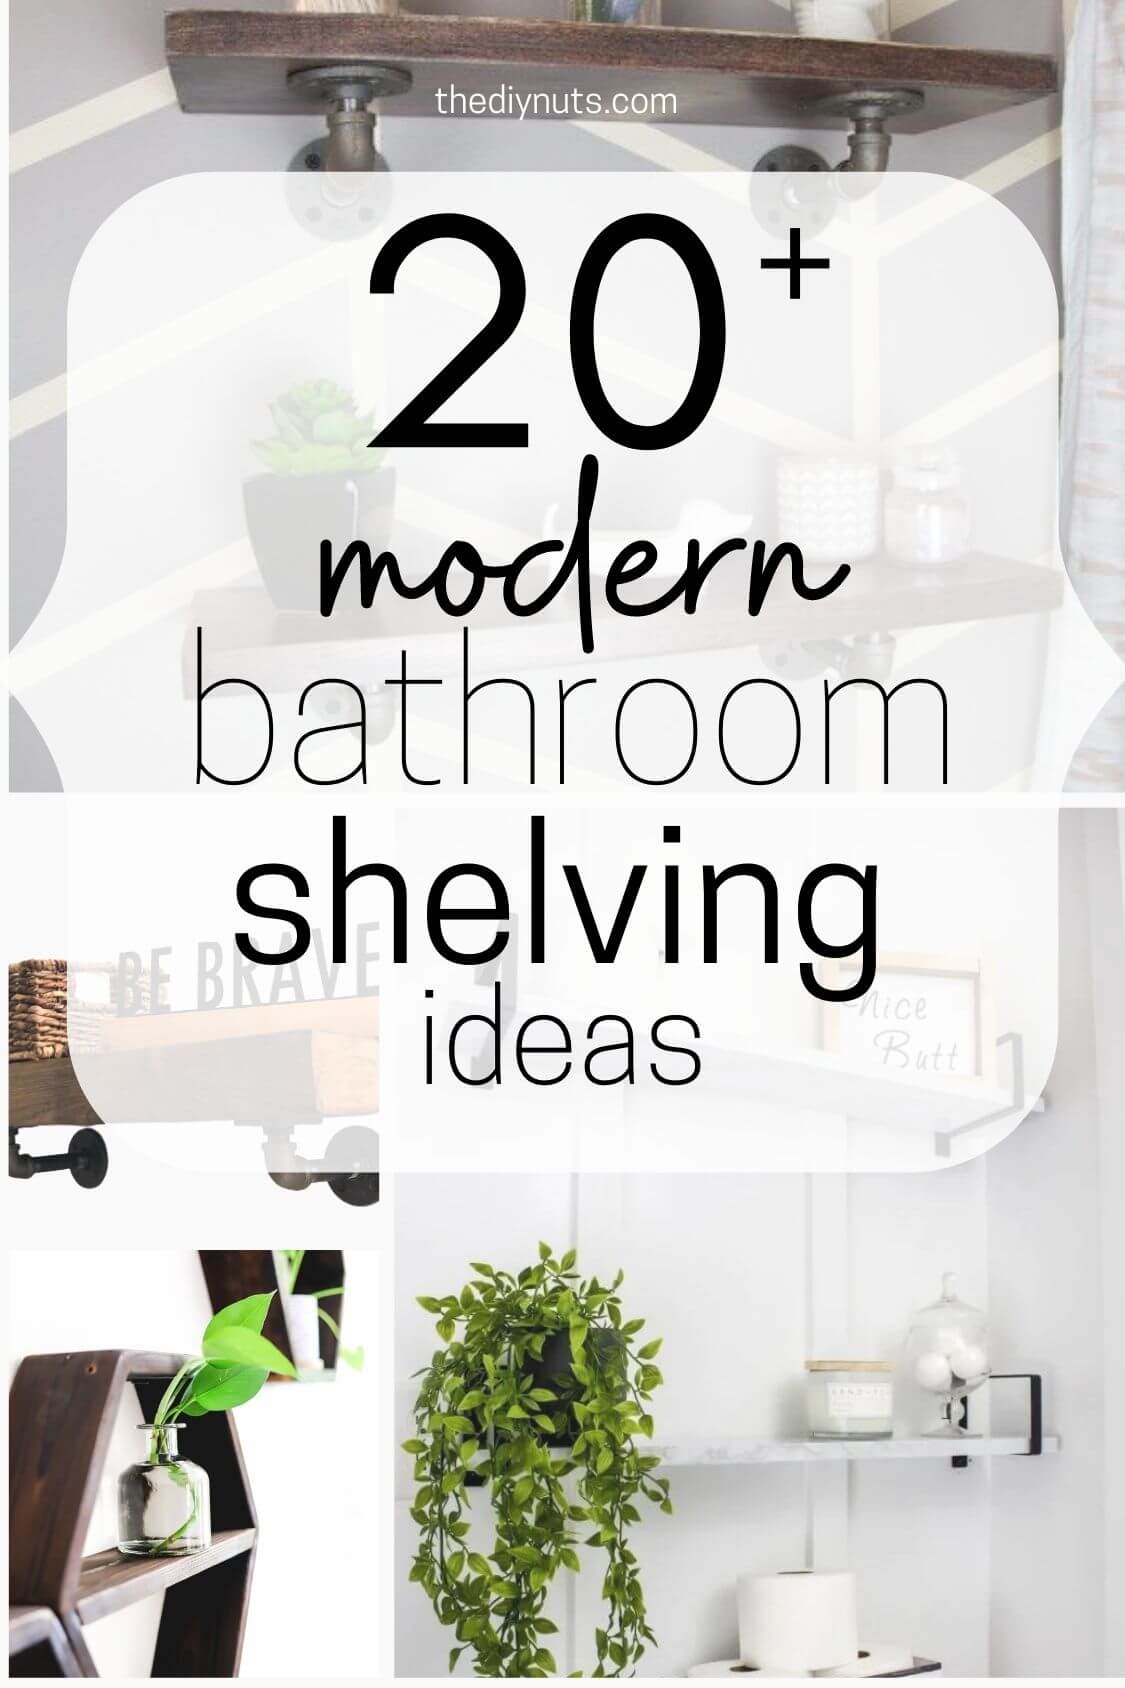 20+ modern bathroom shelving ideas with collage of bathroom shelves in background.